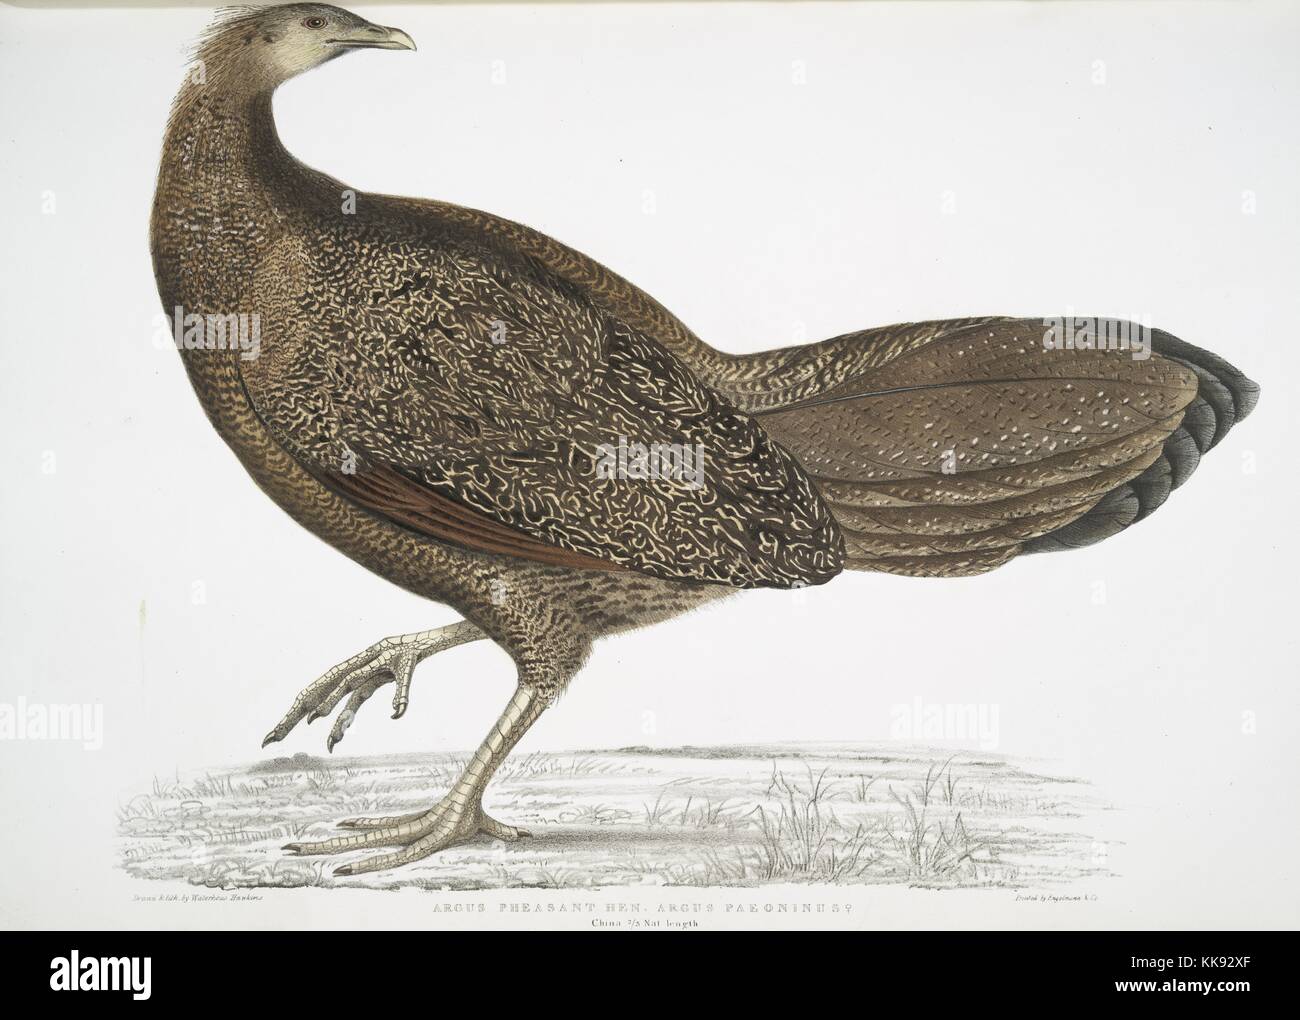 Hand colored print depicting a pheasant, captioned Argus Pheasant (Argus paeoninus), from the book 'Illustrations of Indian Zoology, Chiefly from the Collection of Major General Hardwicke', 1832. From the New York Public Library. Stock Photo